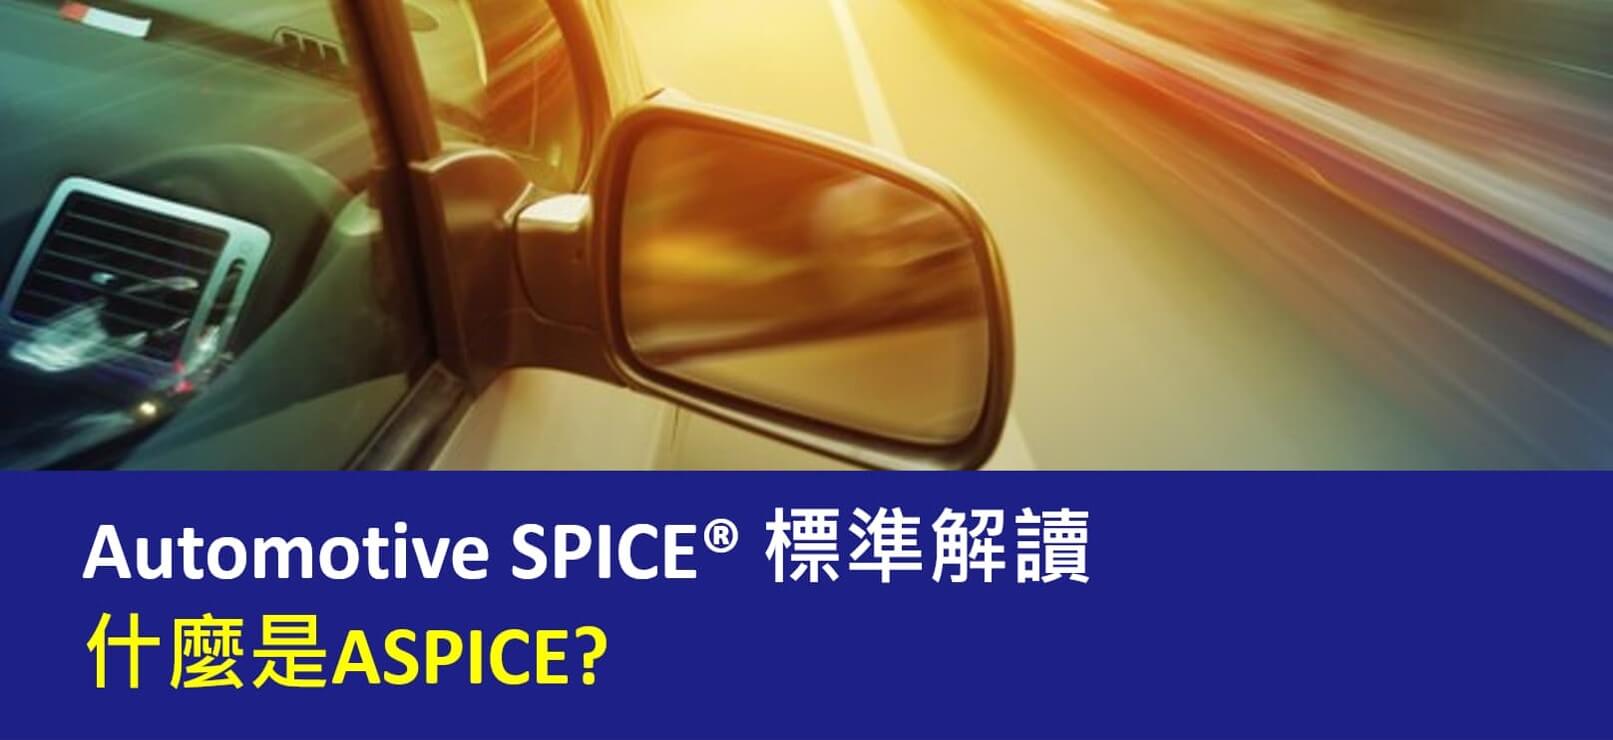 what is aspice